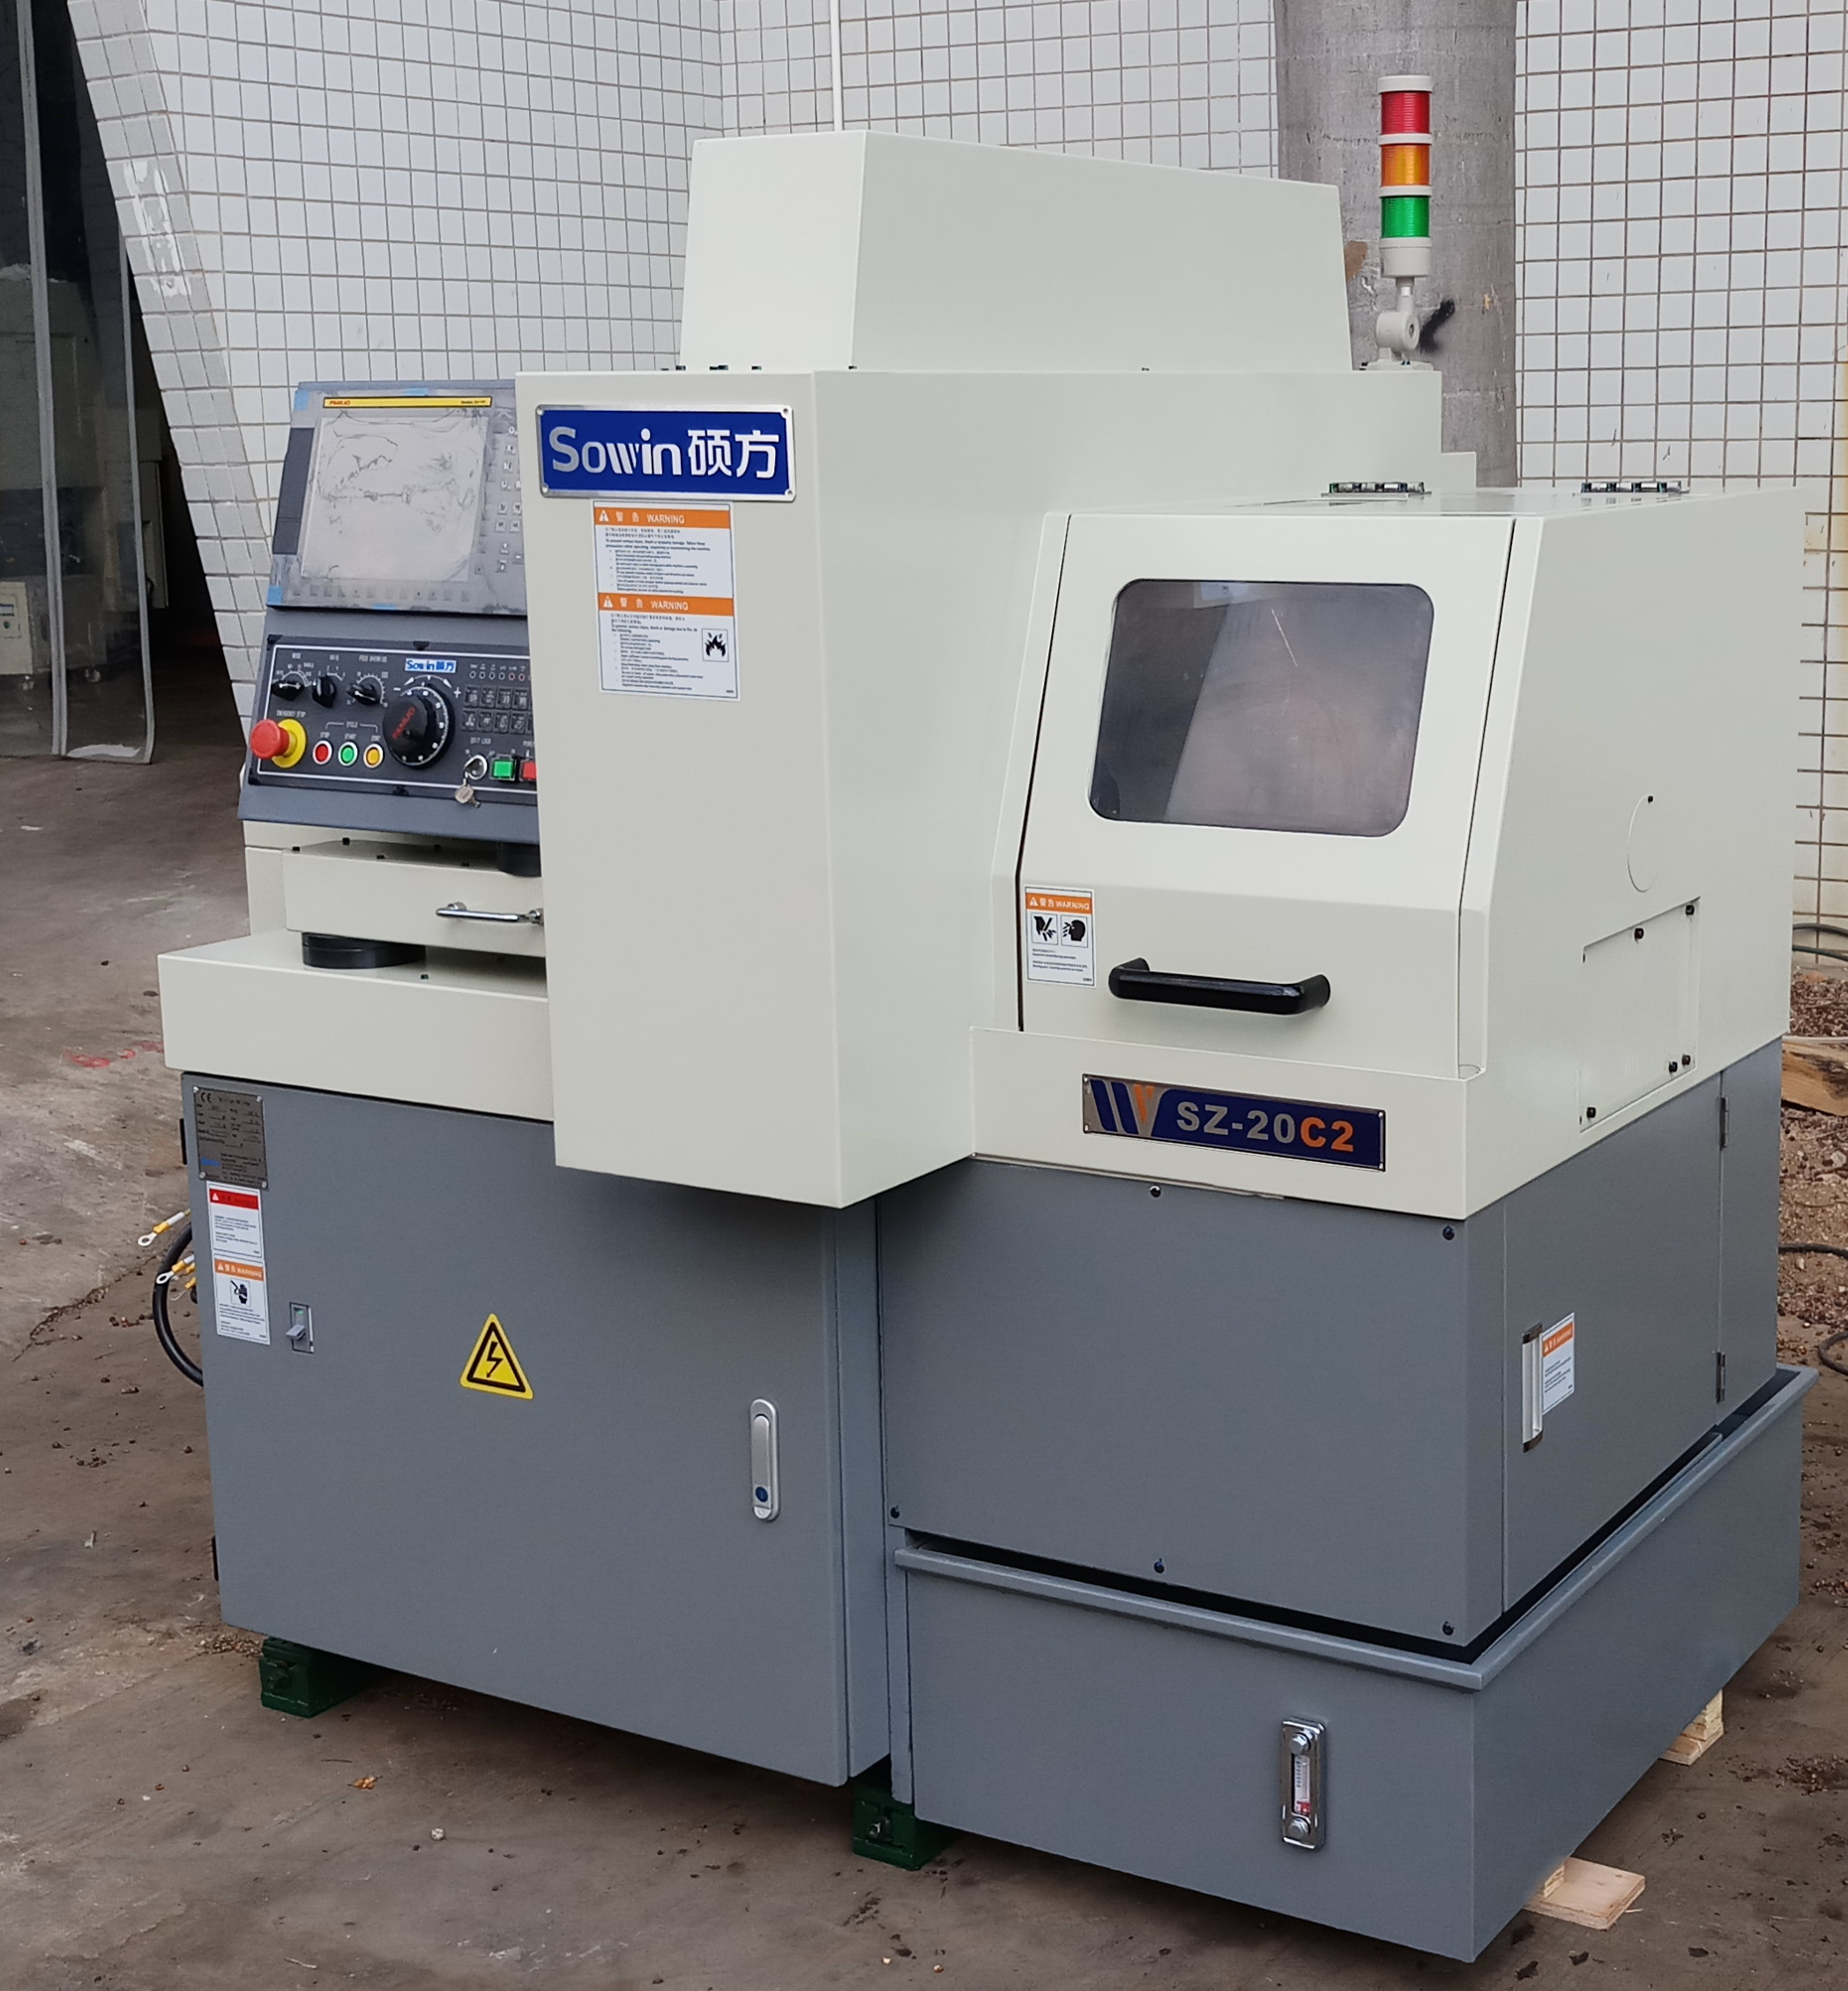 Sowin 20 mm cheap and high quality CNC Swiss type lathe